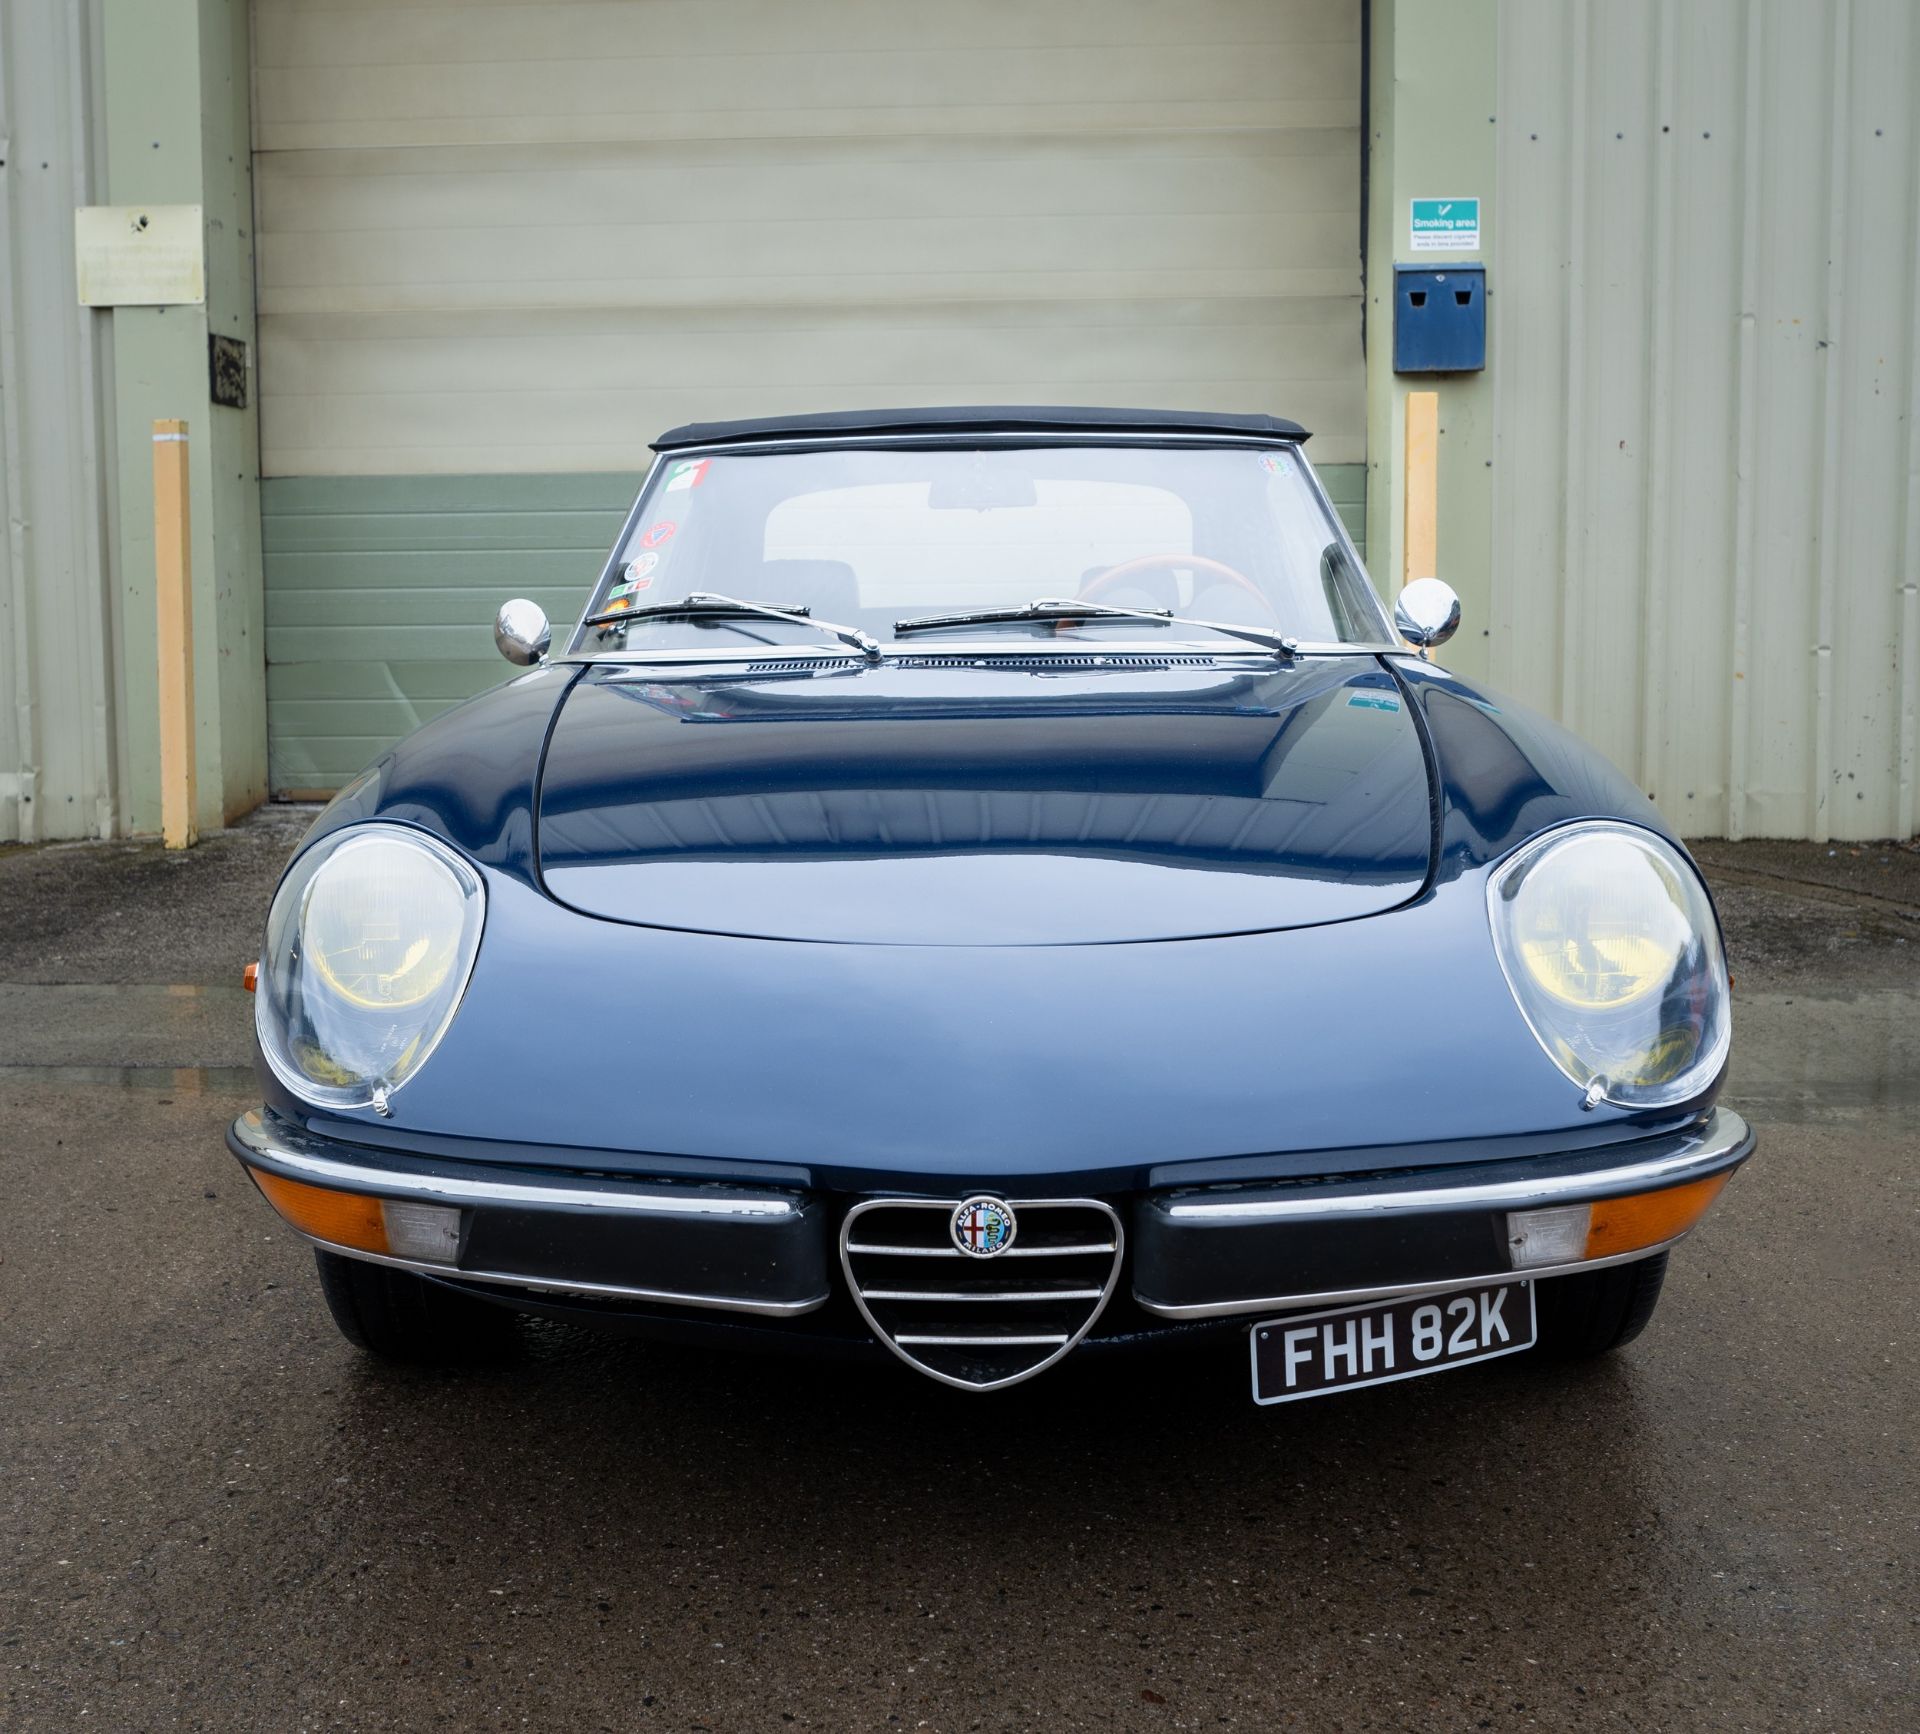 1972 ALFA-ROMEO SPIDER VELOCE Registration Number: FHH 82K Chassis Number: AR*2460638 Widely - Image 3 of 16